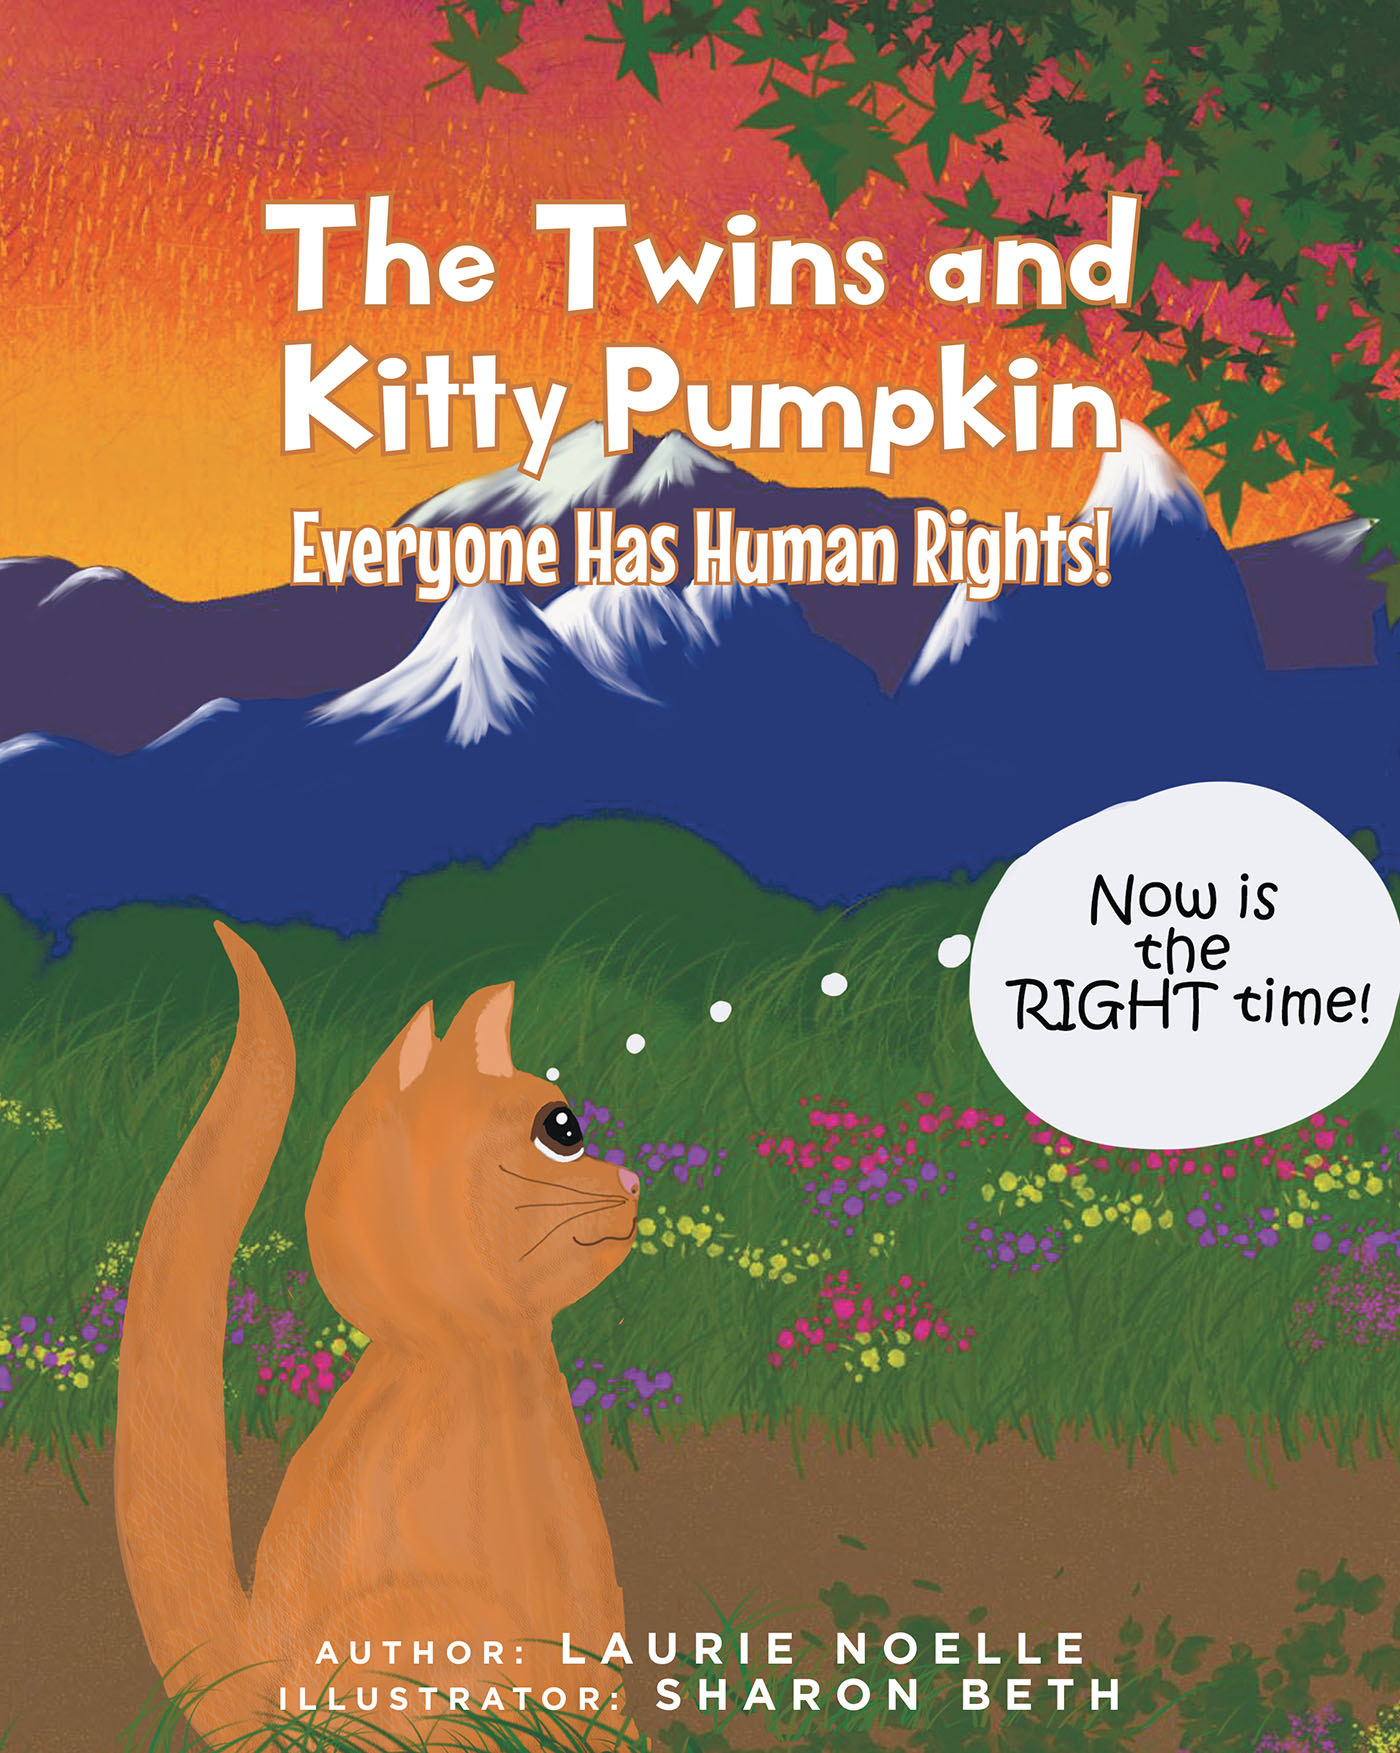 Laurie Noelle's New Book, "The Twins and Kitty Pumpkin: Everyone Has Human Rights!" Follows Twins Jaime, Jen and Their Cat as They Learn About Human Rights